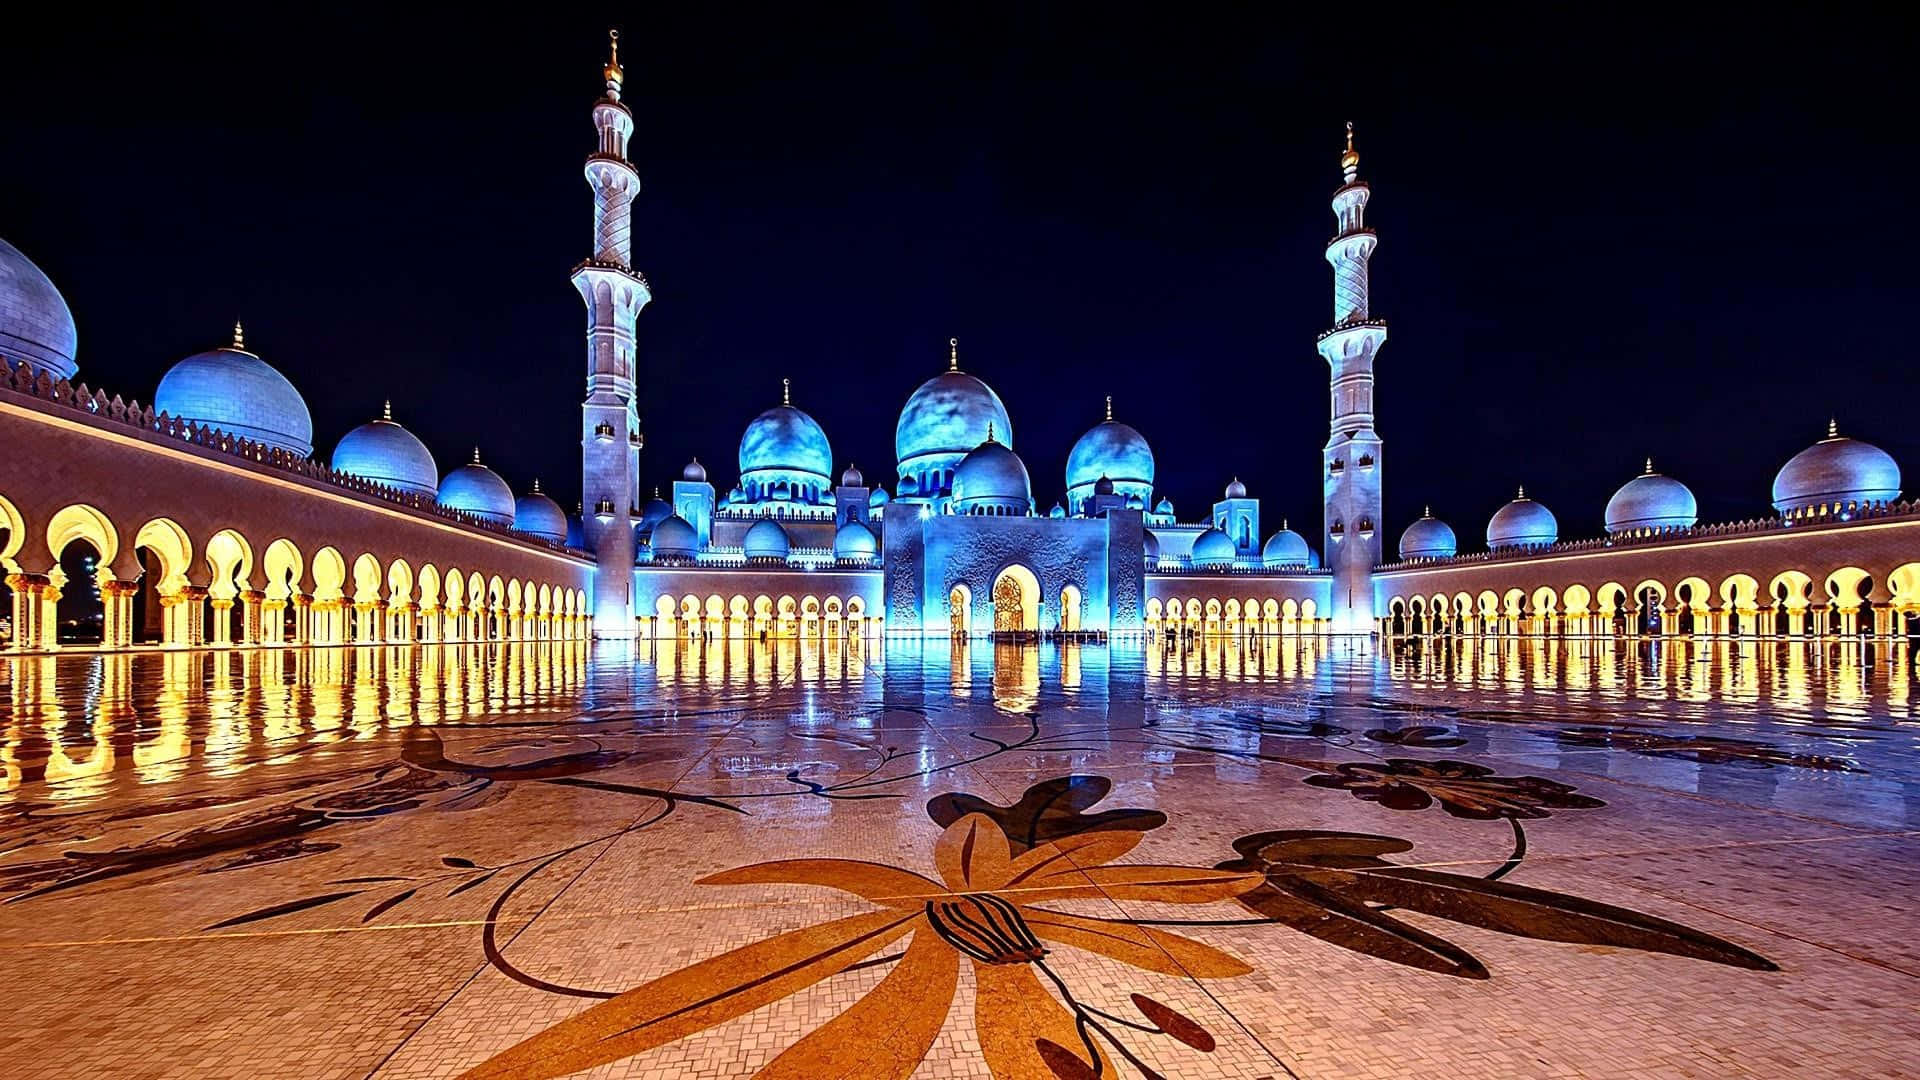 A Mosque Lit Up At Night